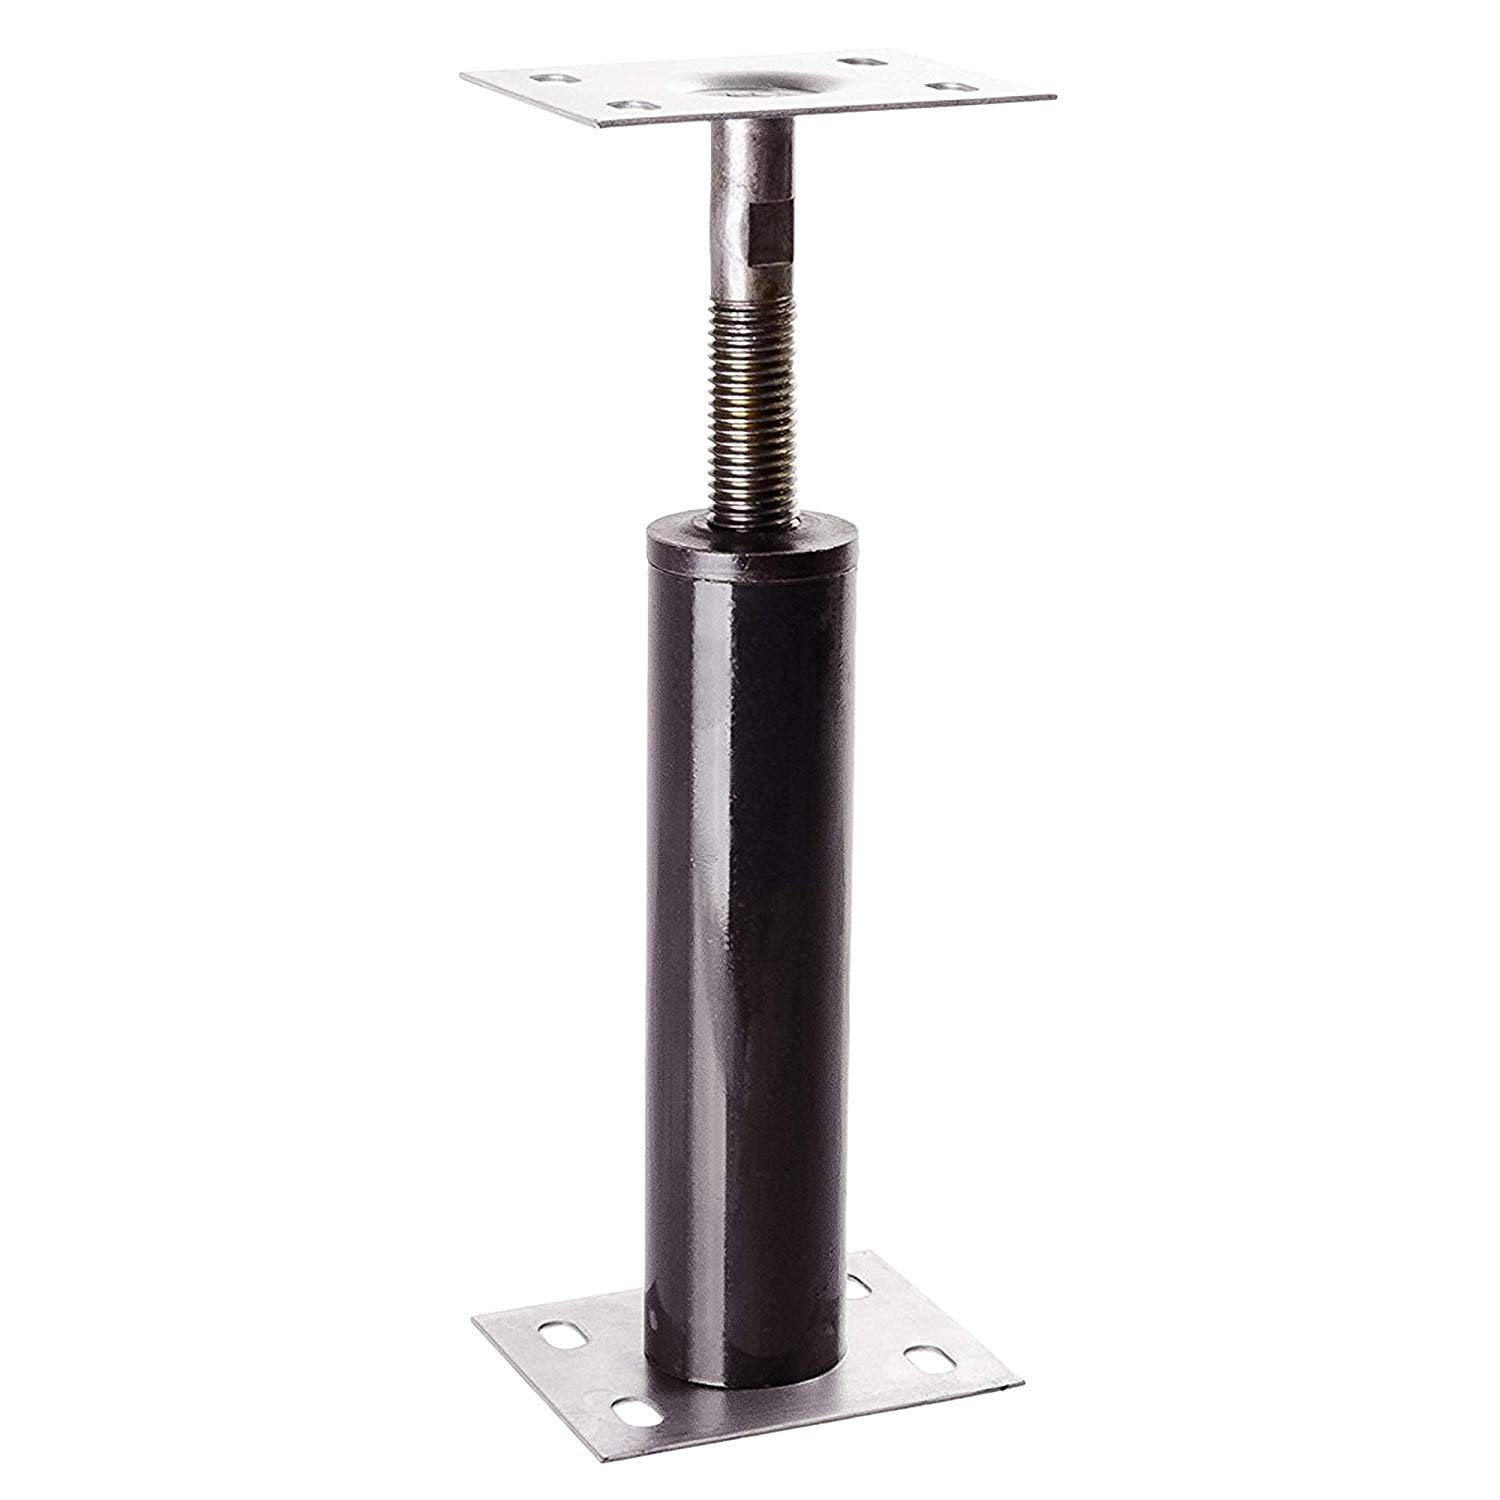 4x4 for sale online Akron Products Adjustable Shoring Jack 